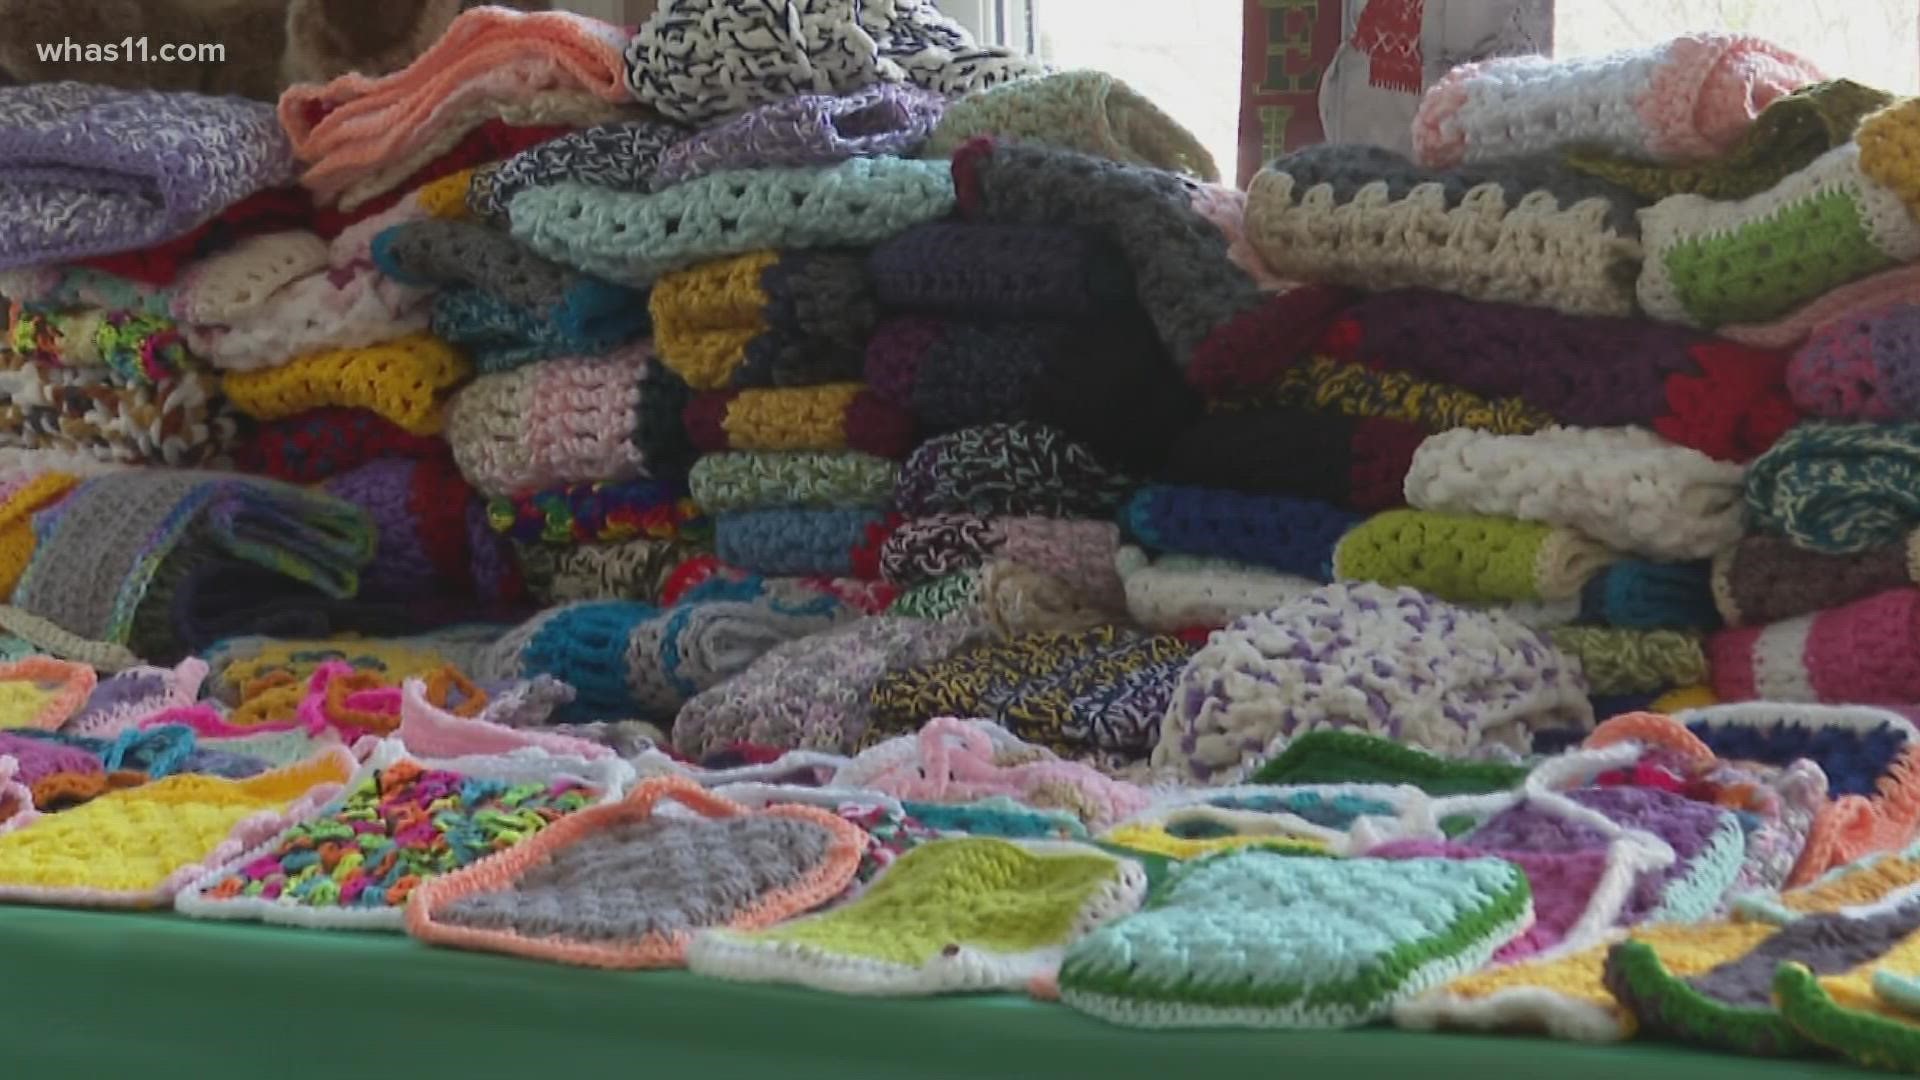 Group gifts crocheted items to Louisville senior citizens